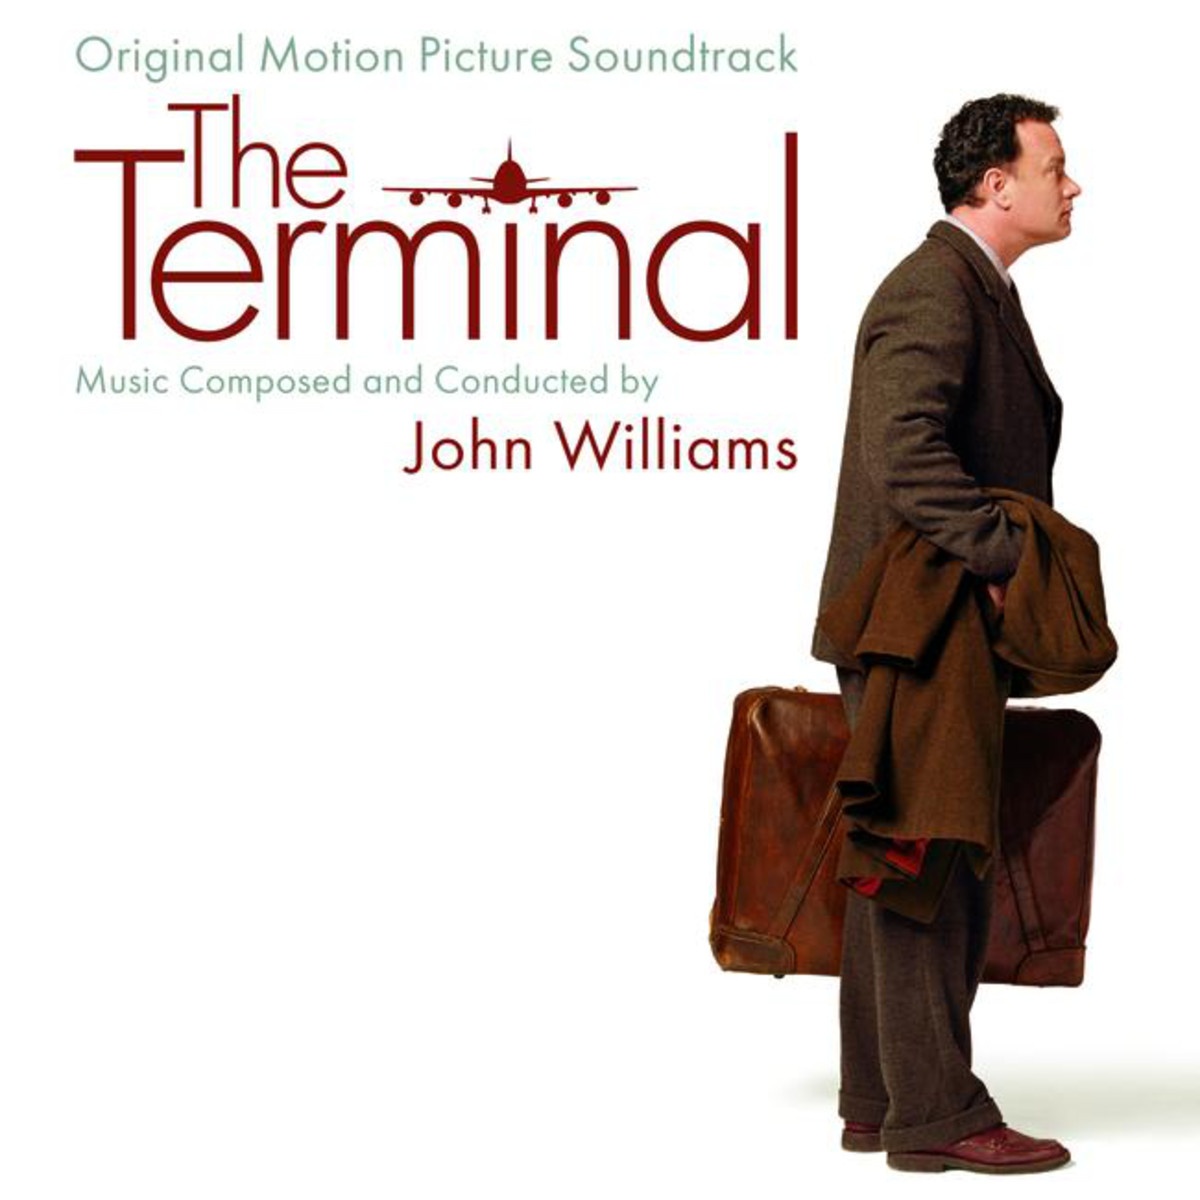 Williams: Finding Coins and Learning To Read - The Terminal/Soundtrack Version